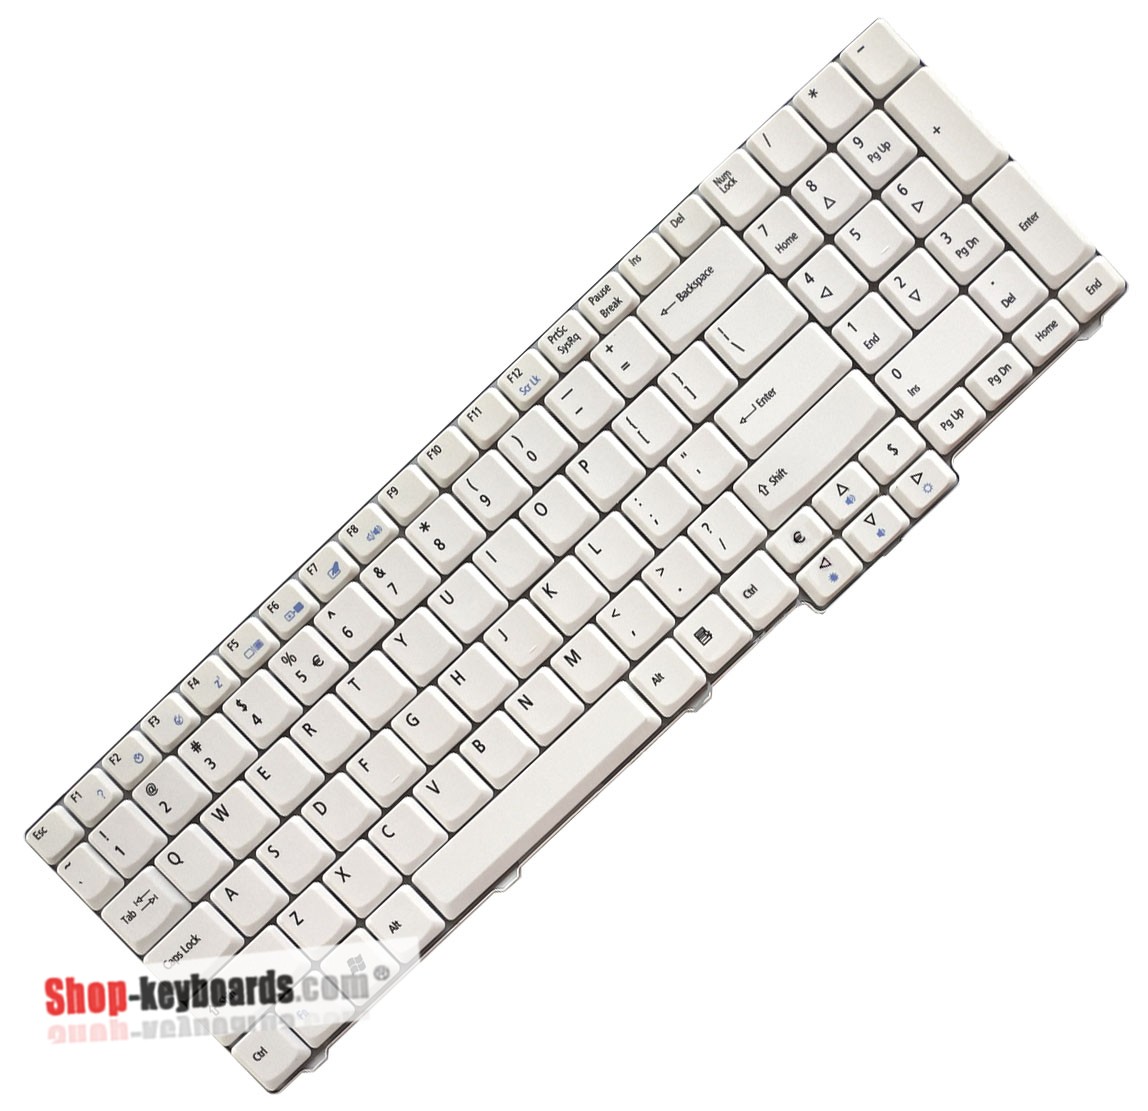 Acer Aspire 8730ZG-343G25Mn Keyboard replacement